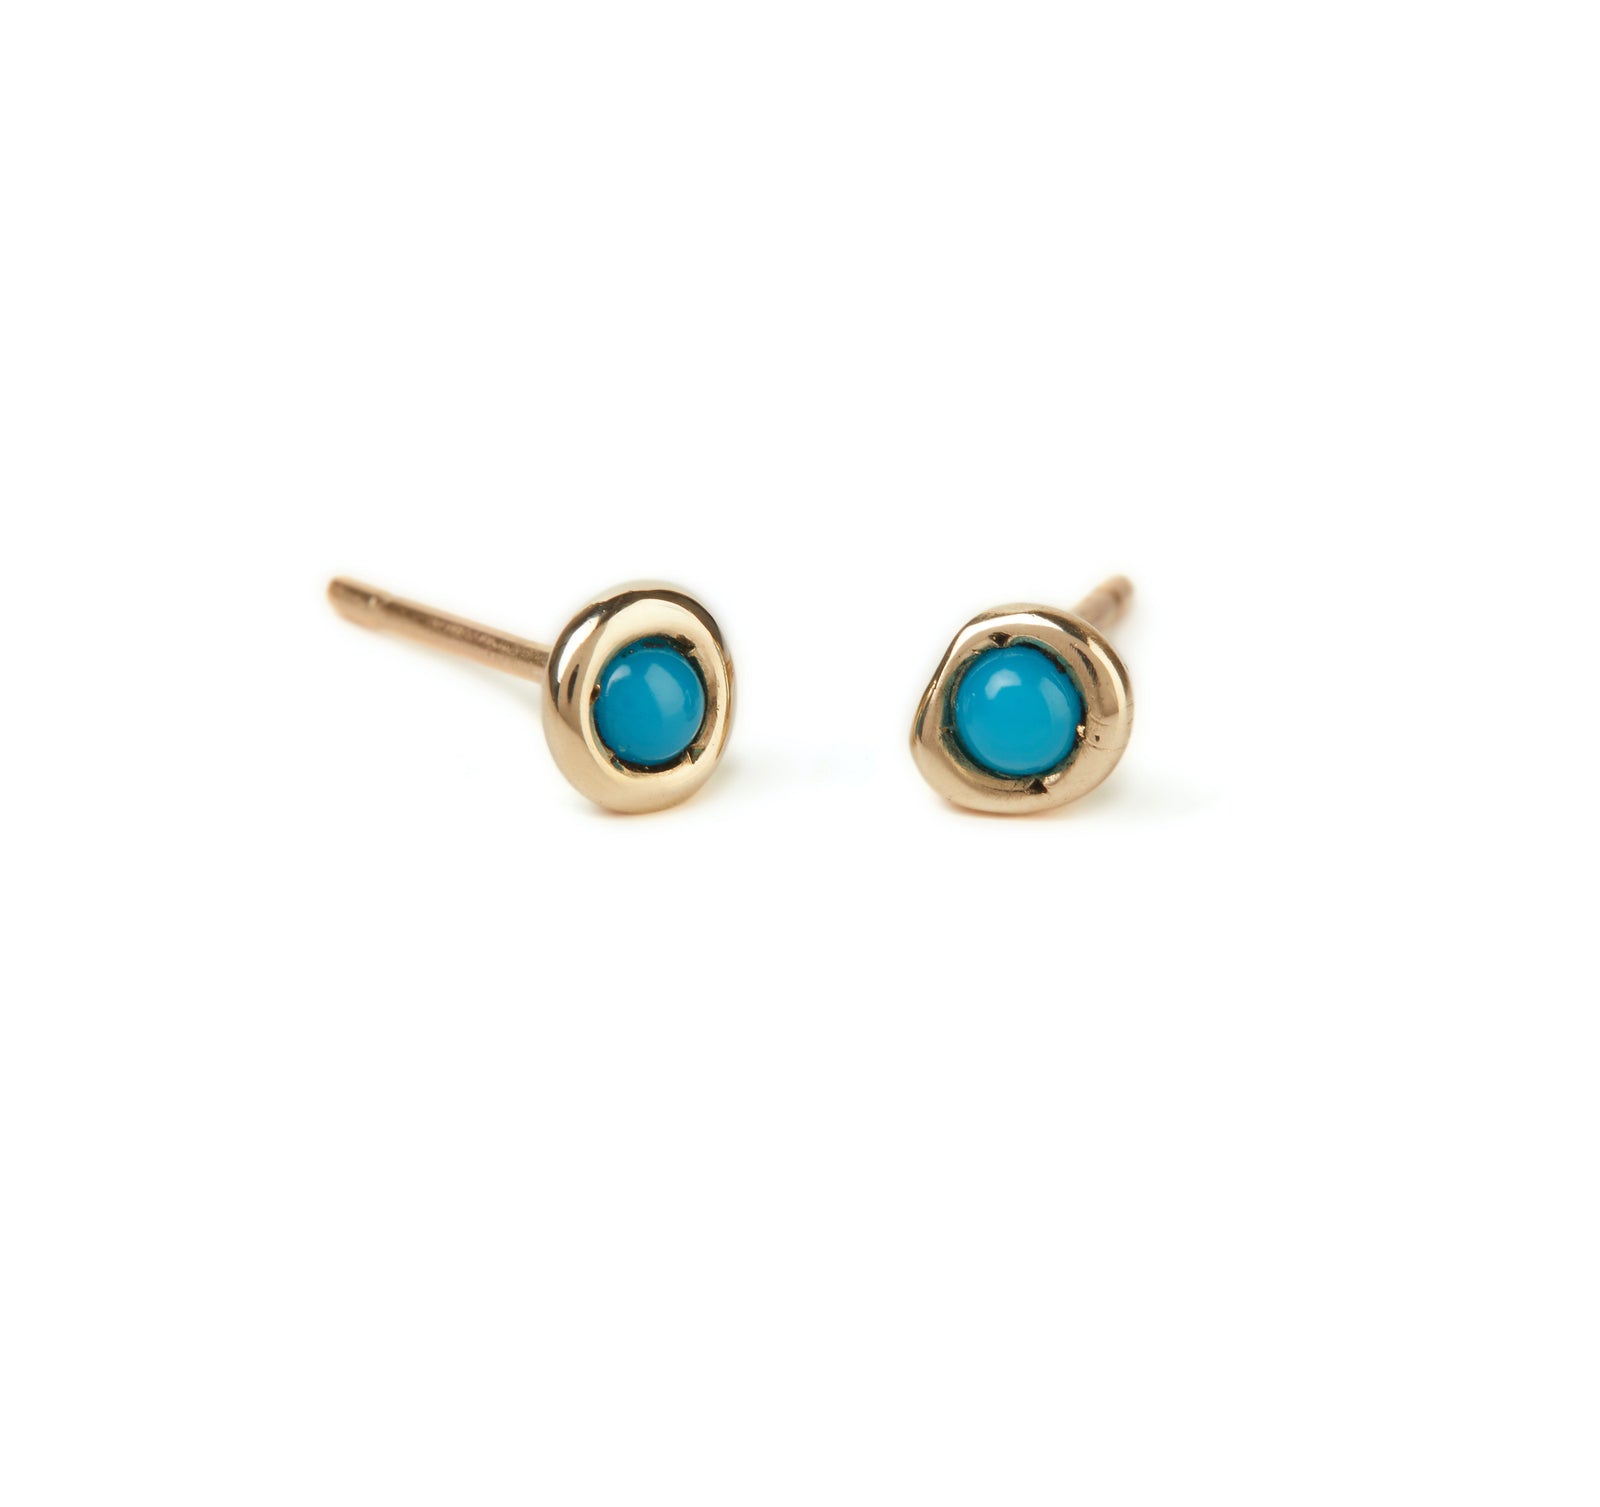 'Calm' Turquoise Emotion Stud Earrings